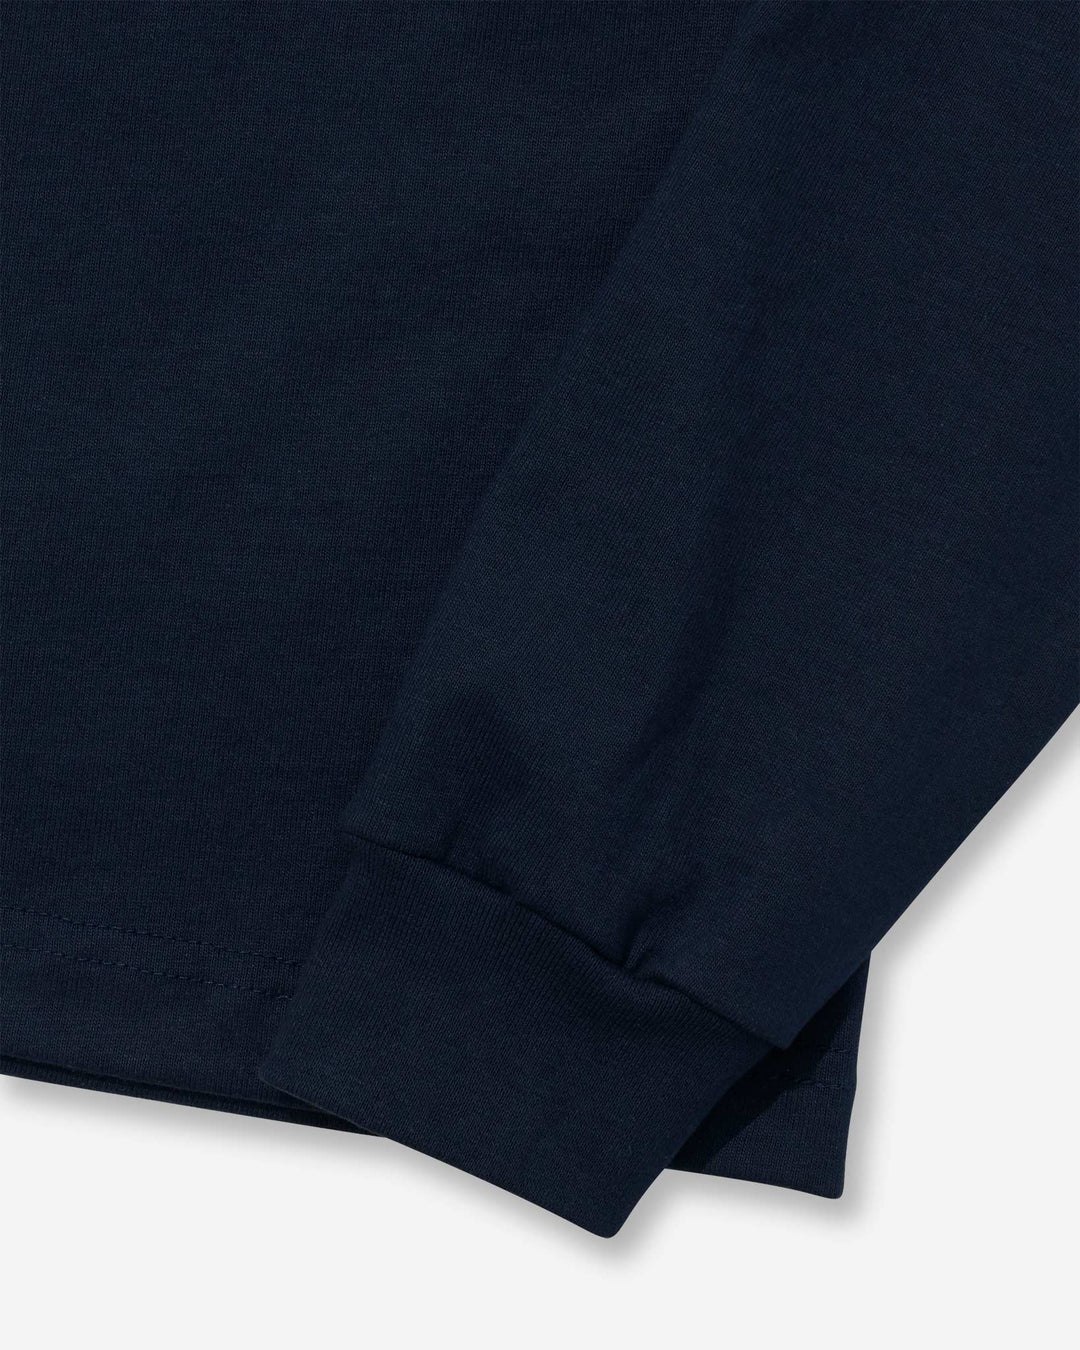 MAX-WEIGHT® Long Sleeve - Navy